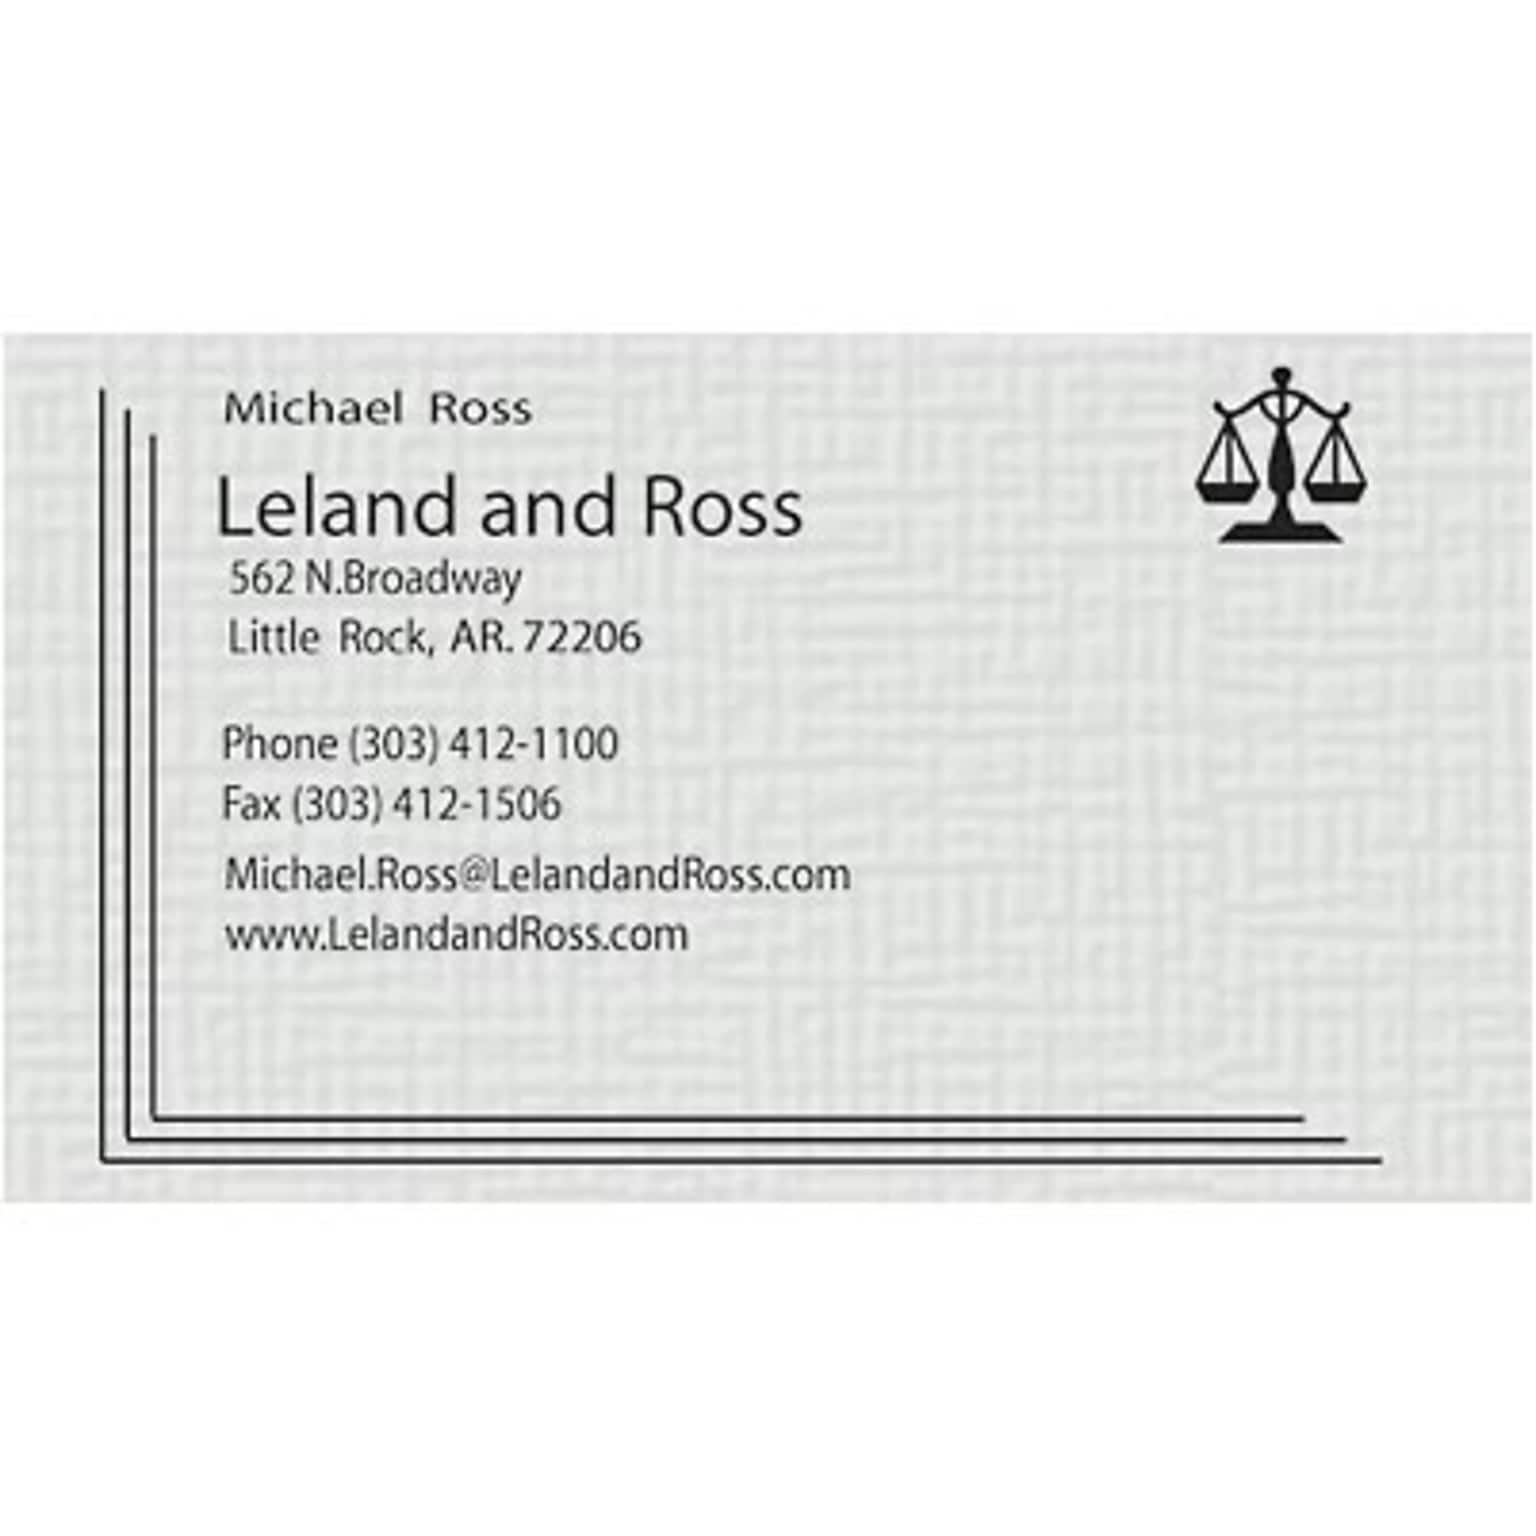 Custom 1-2 Color Business Cards, CLASSIC® Linen Antique Gray 80#, Raised Print, 1 Standard Ink, 1-Sided, 250/PK